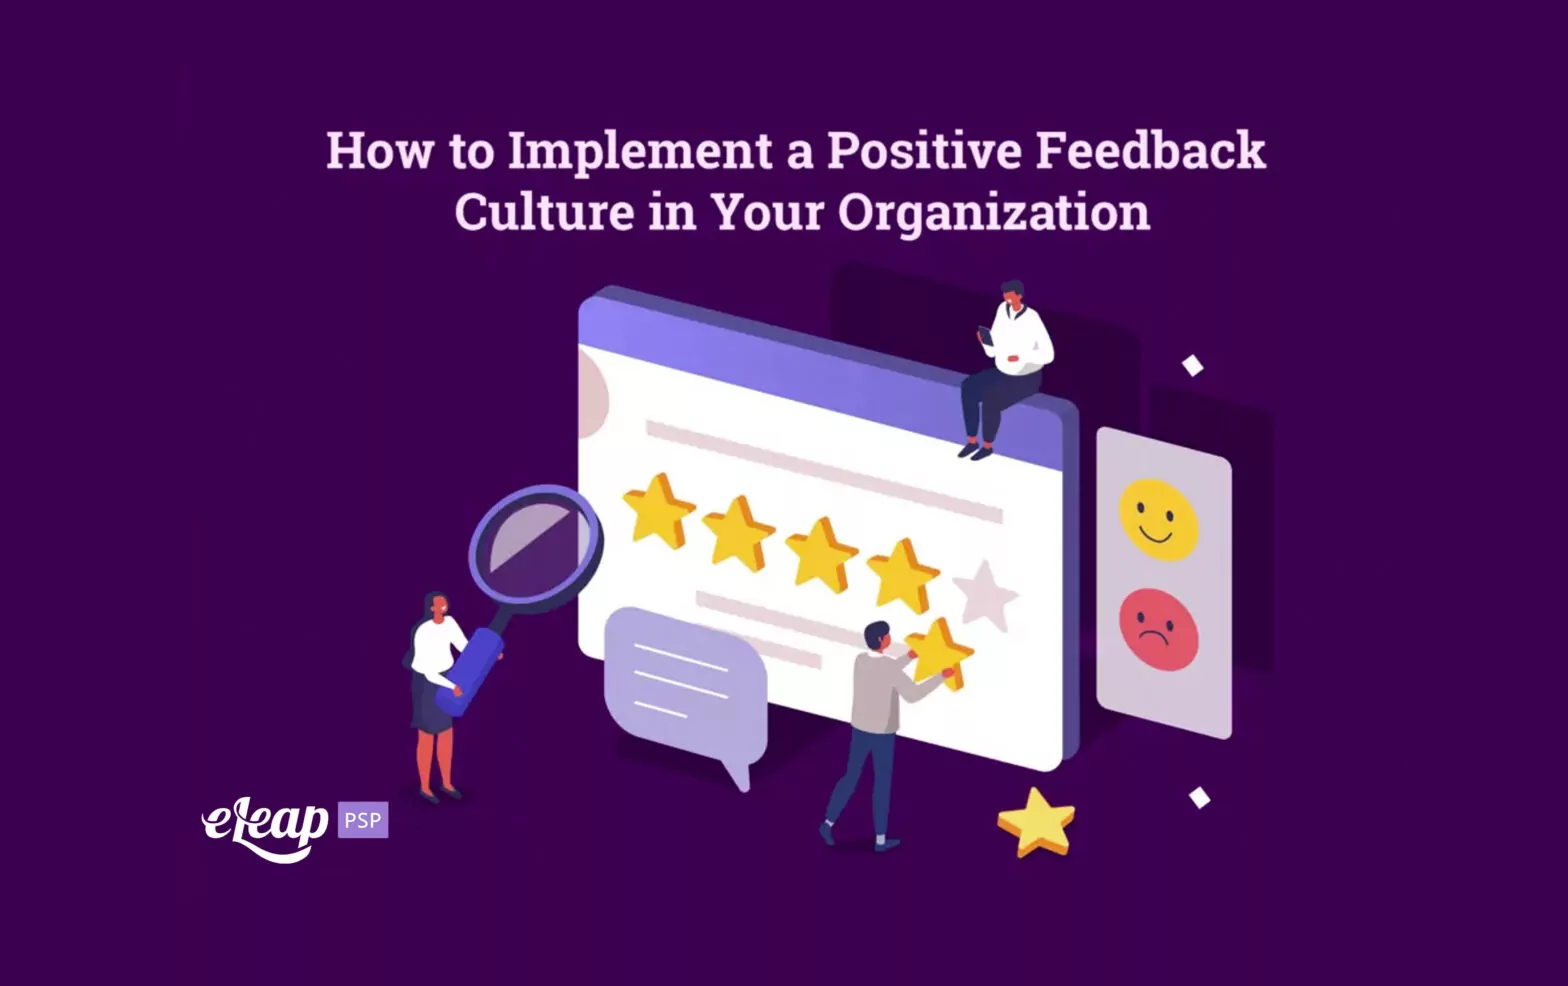 How to Implement a Positive Feedback Culture in Your Organization